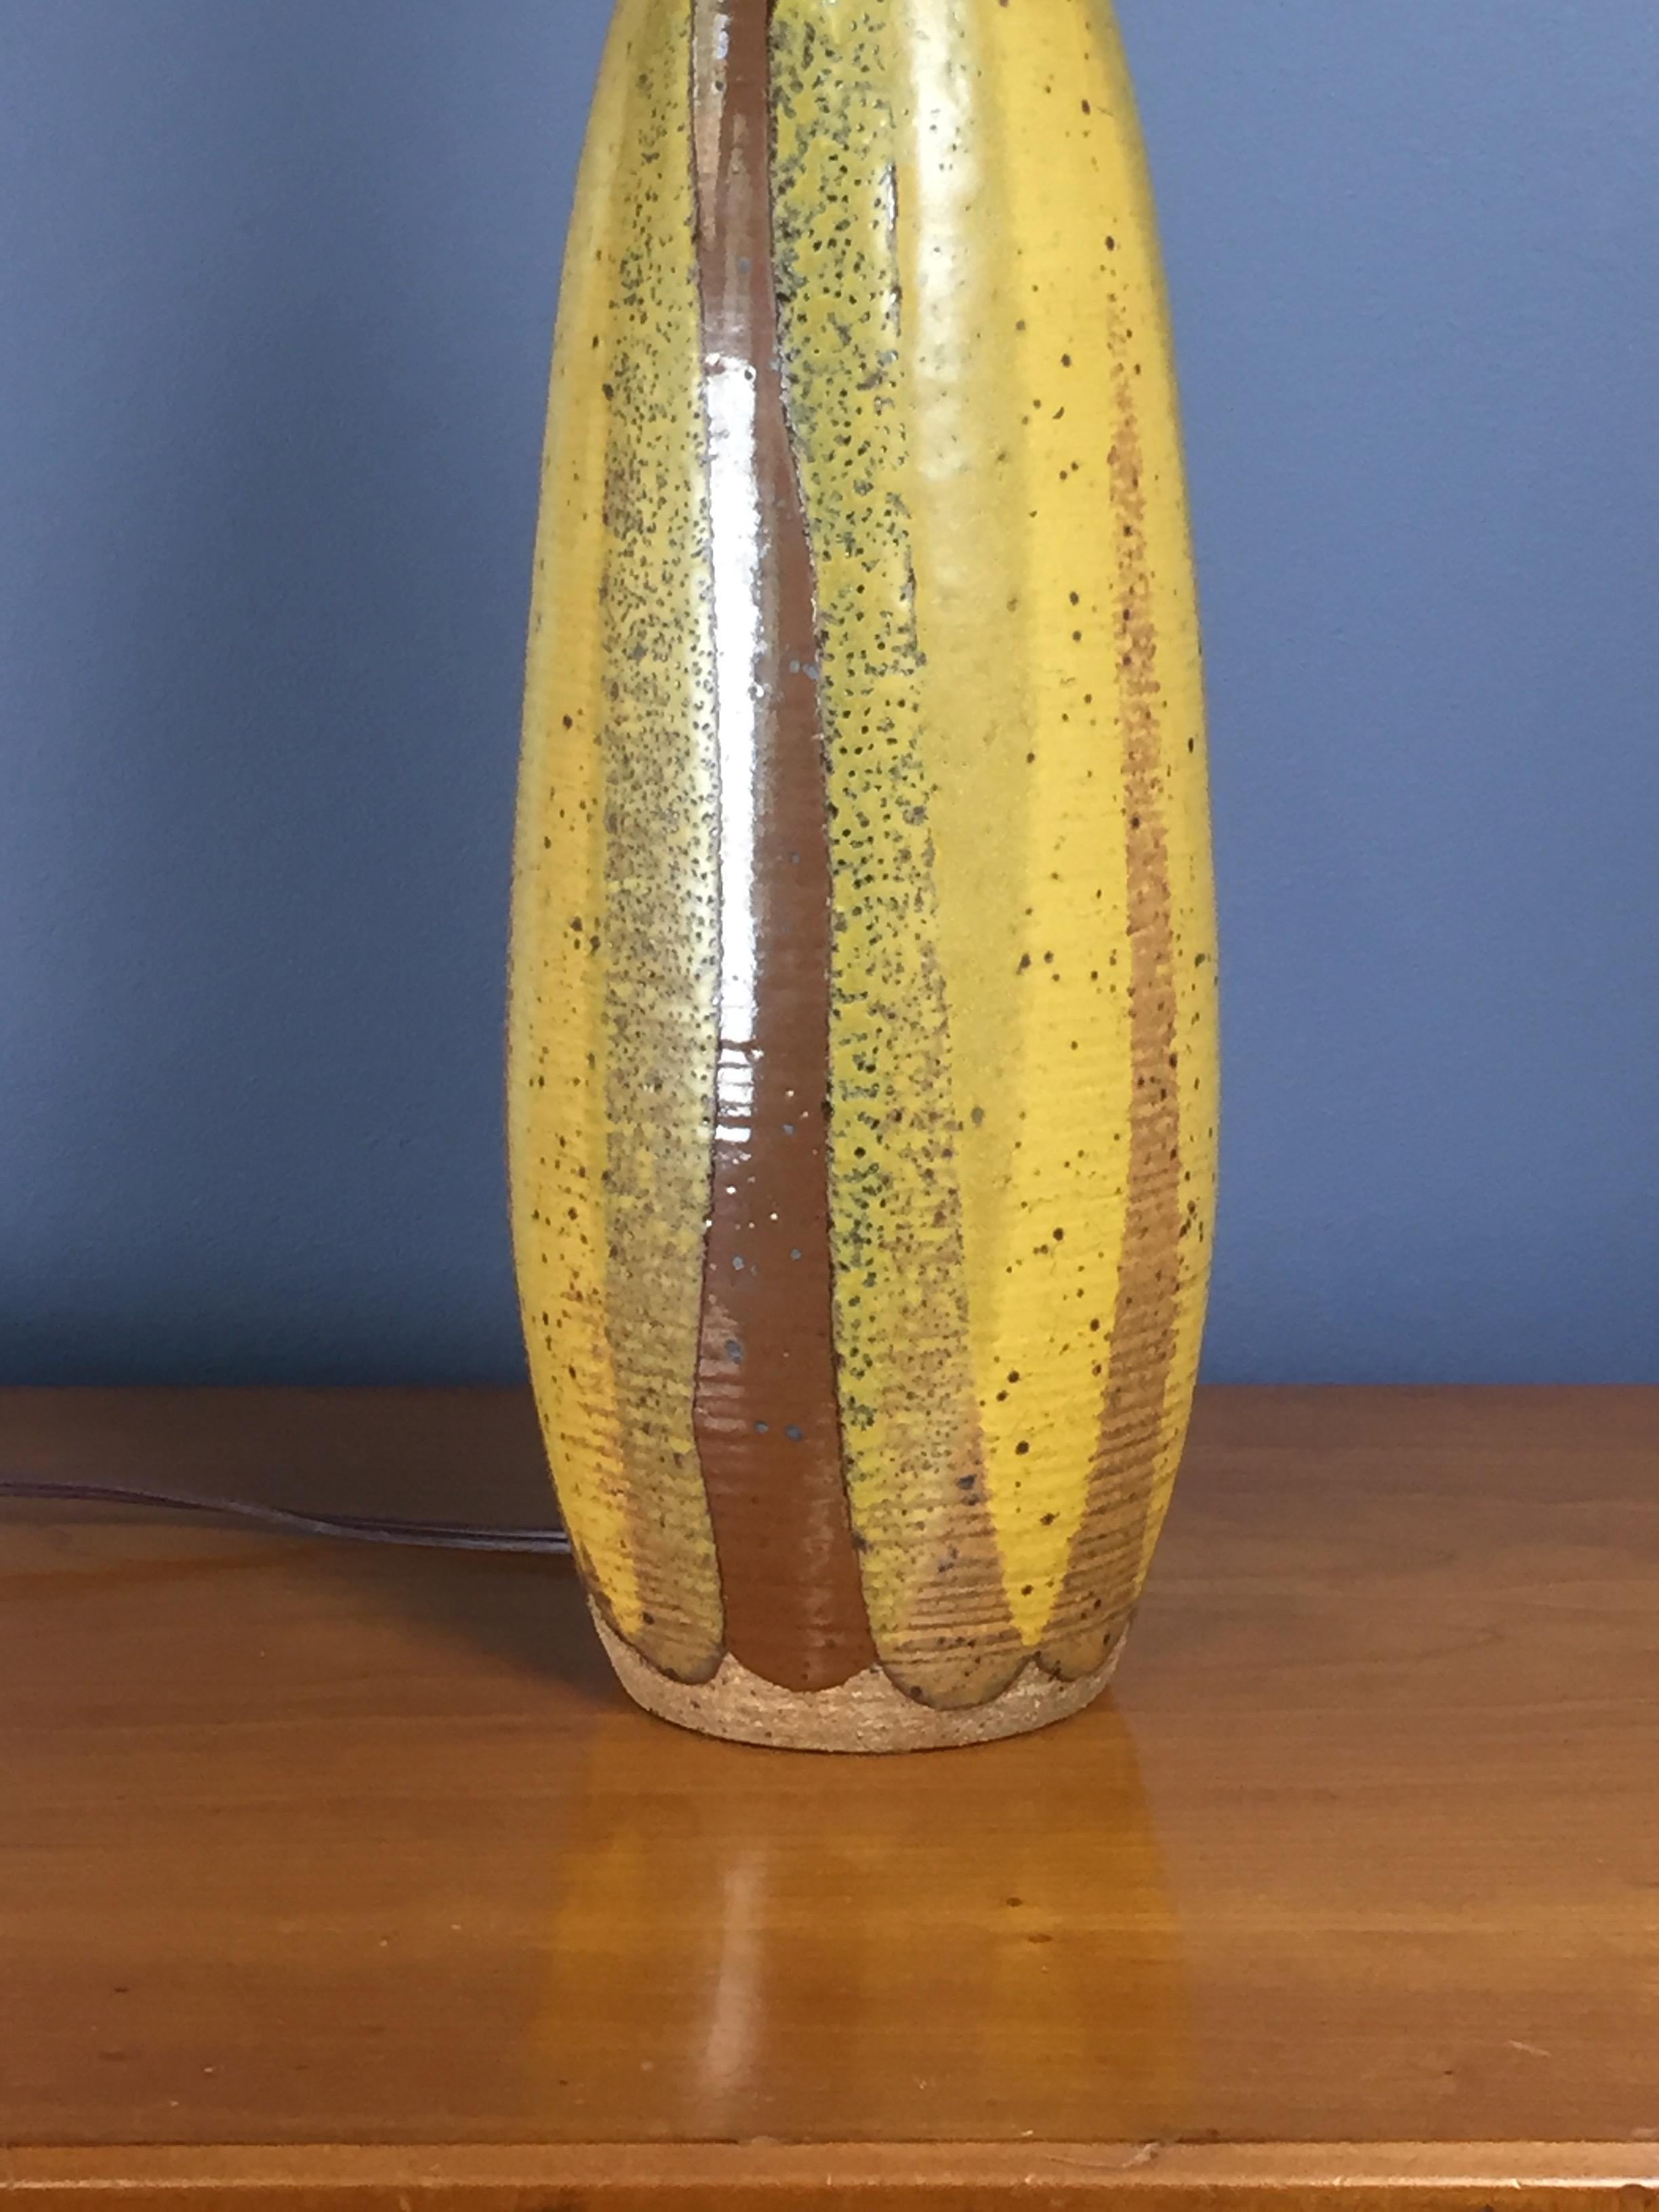 North American David Cressey Ceramic Table Lamp in Yellows and Browns Midcentury Style